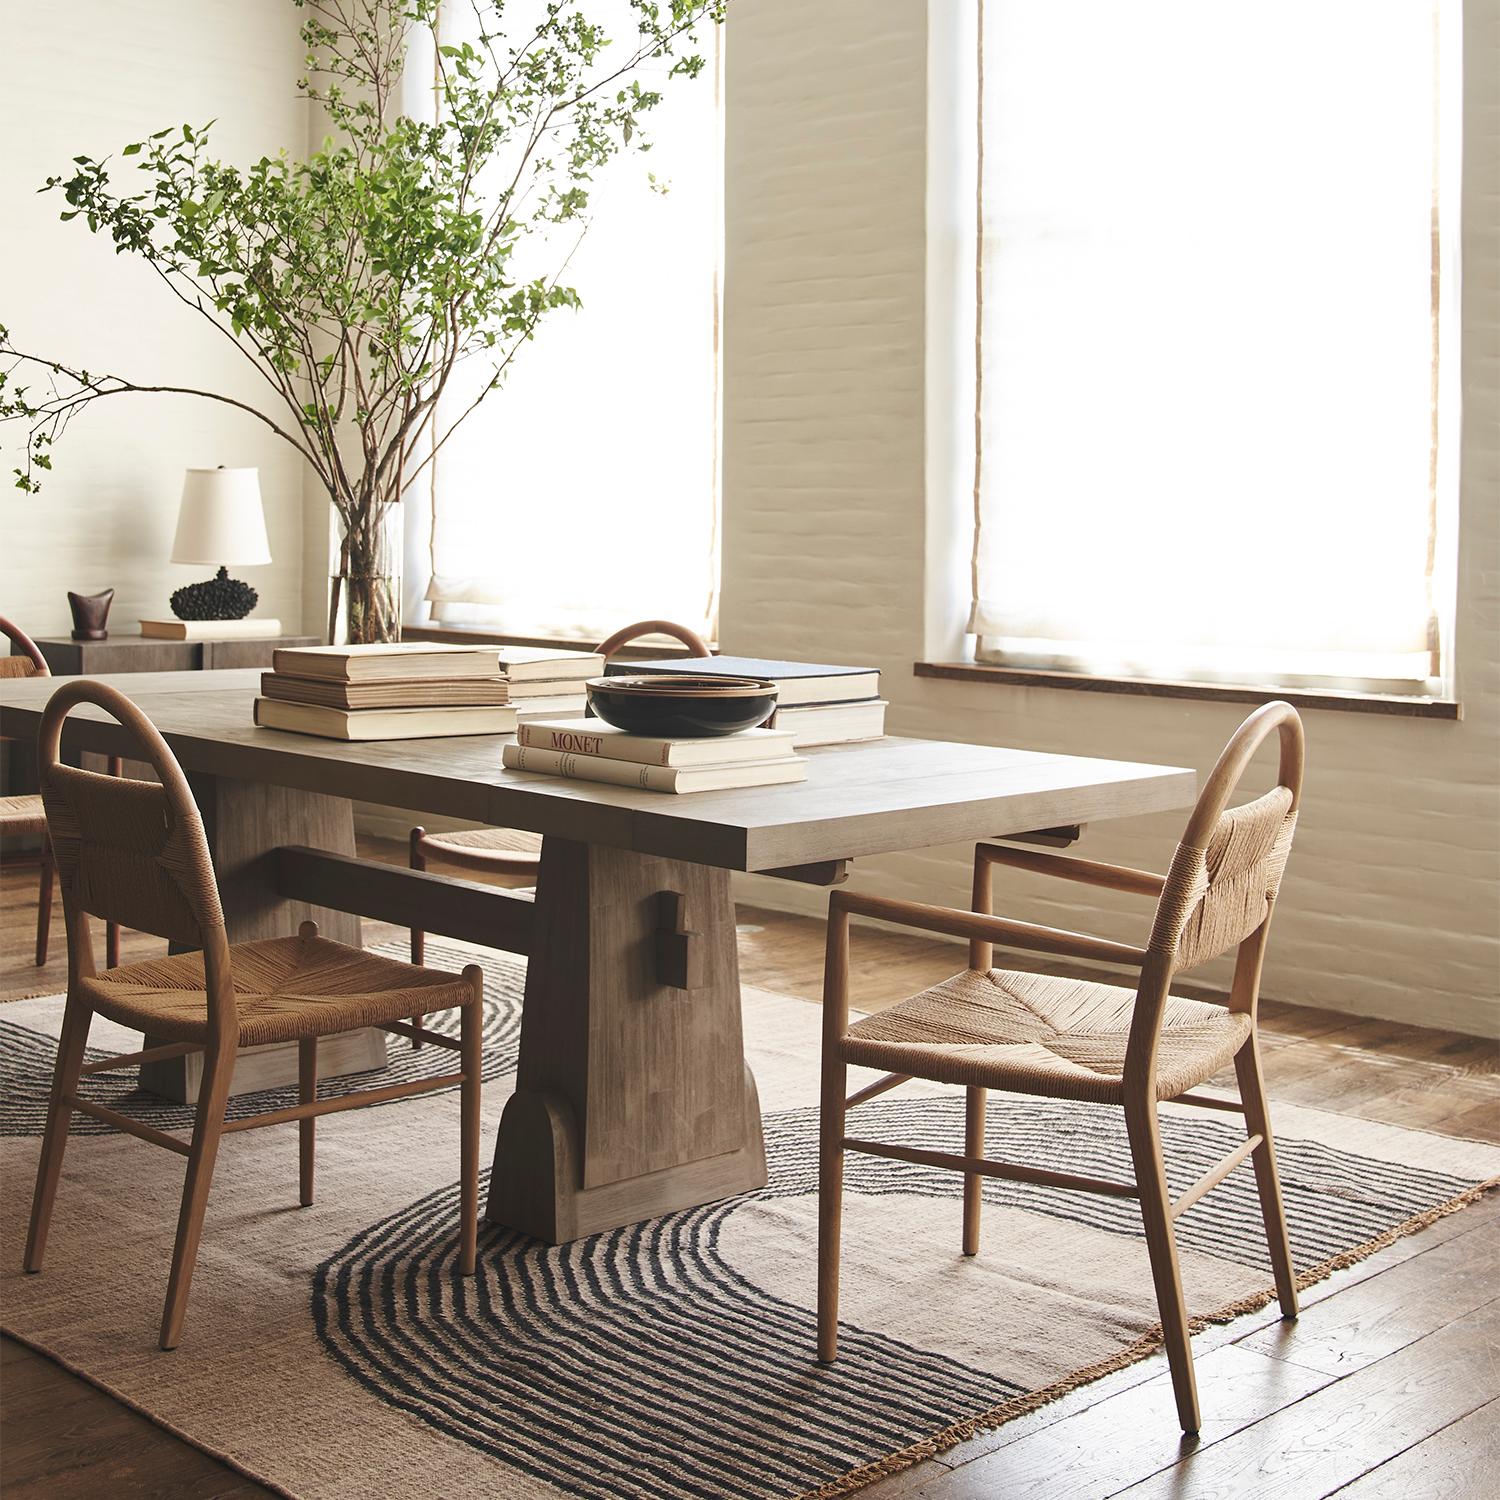 This elegant, minimalist dining table draws on design history from Swedish farm style to mid-century sculpture, and a driftwood finish adds a modern, versatile update to suit any décor.